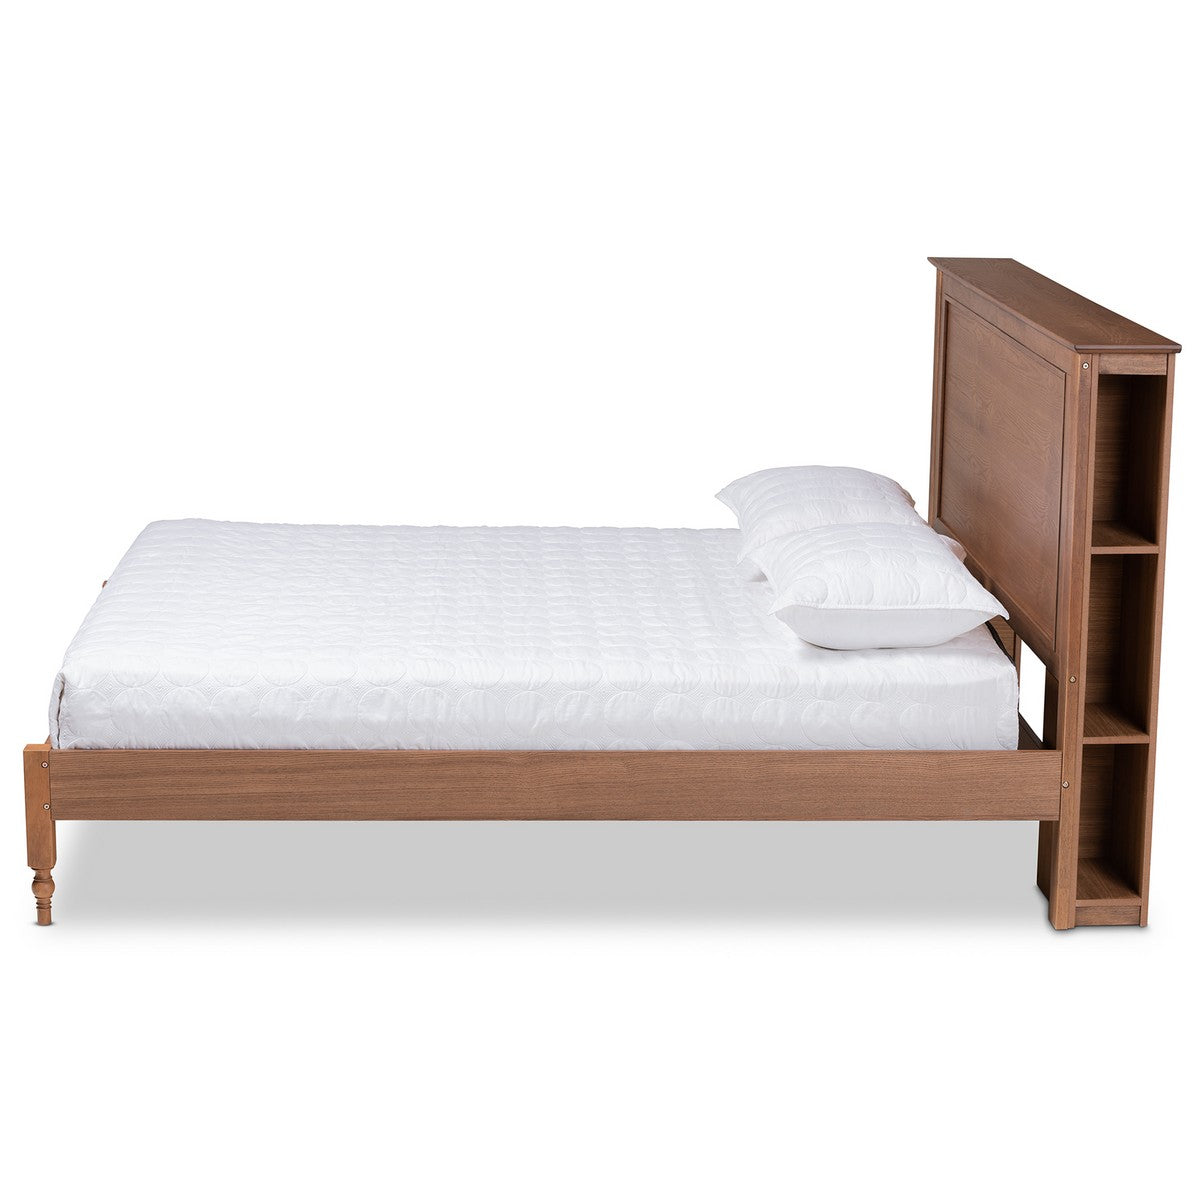 Baxton Studio Danielle Traditional and Transitional Rustic Ash Walnut Brown Finished Wood Full Size Platform Storage Bed with Built-In Shelves